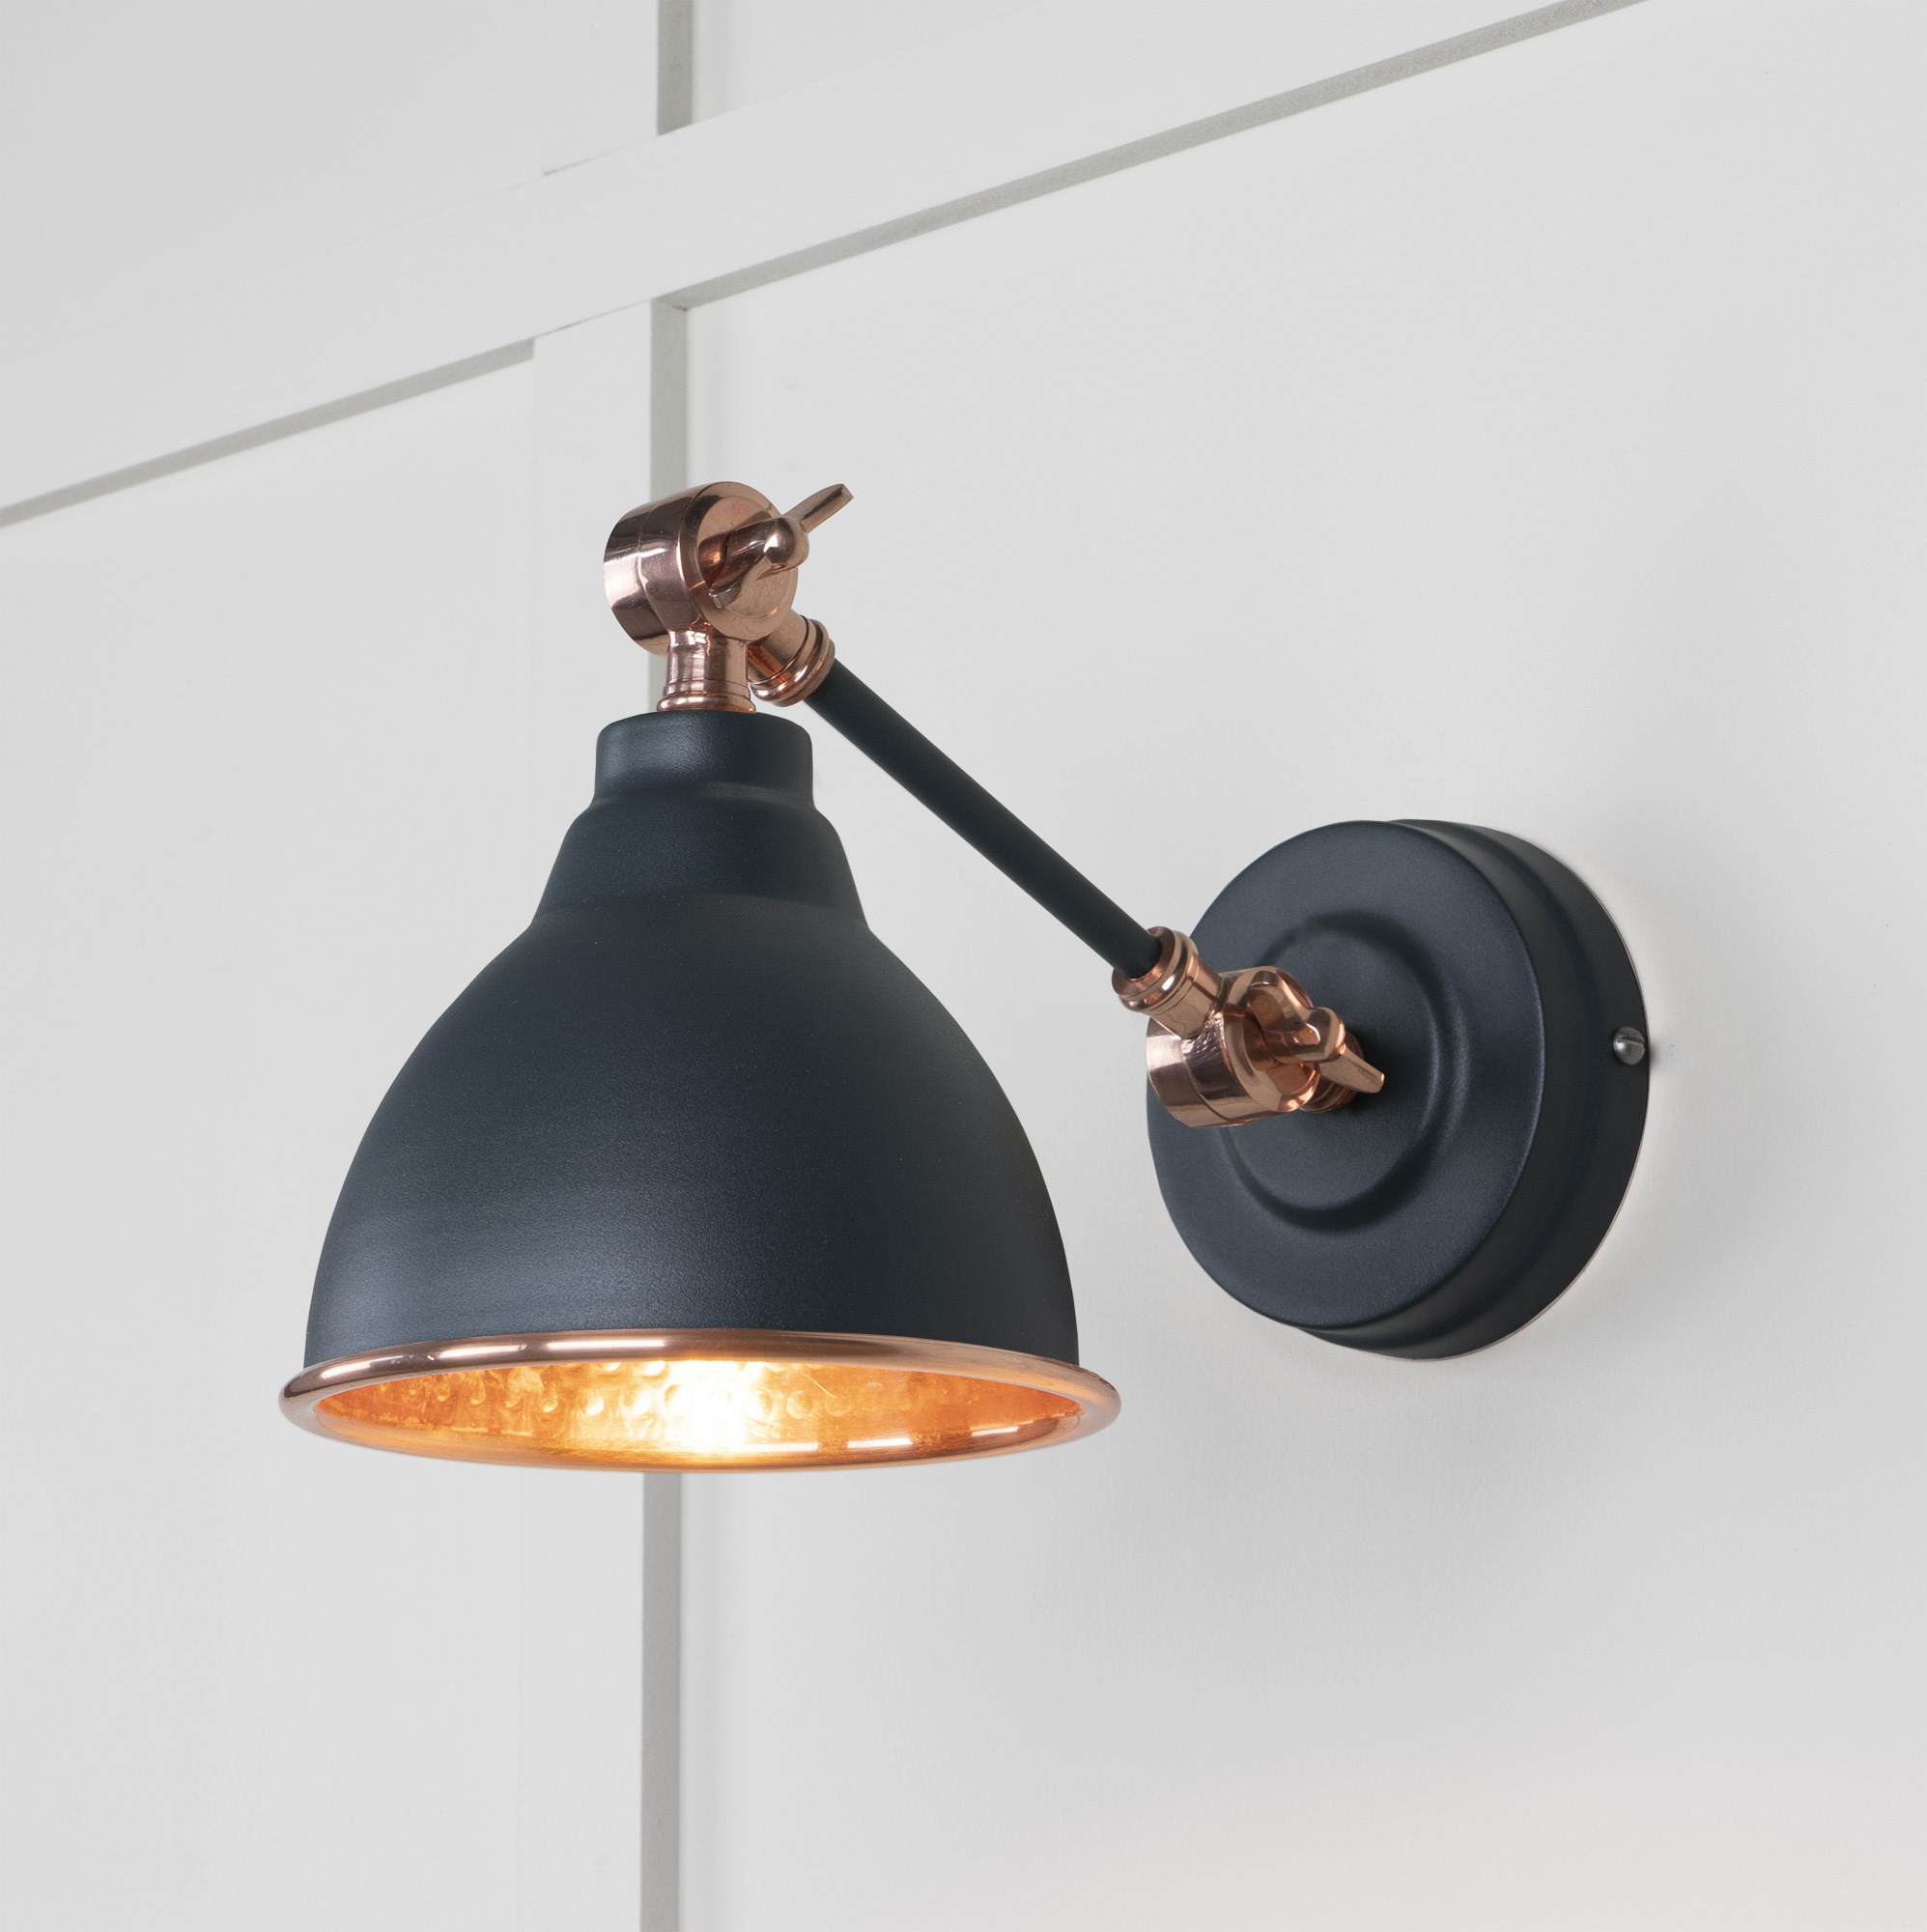 Hammered Copper Brindley Wall Light in Soot